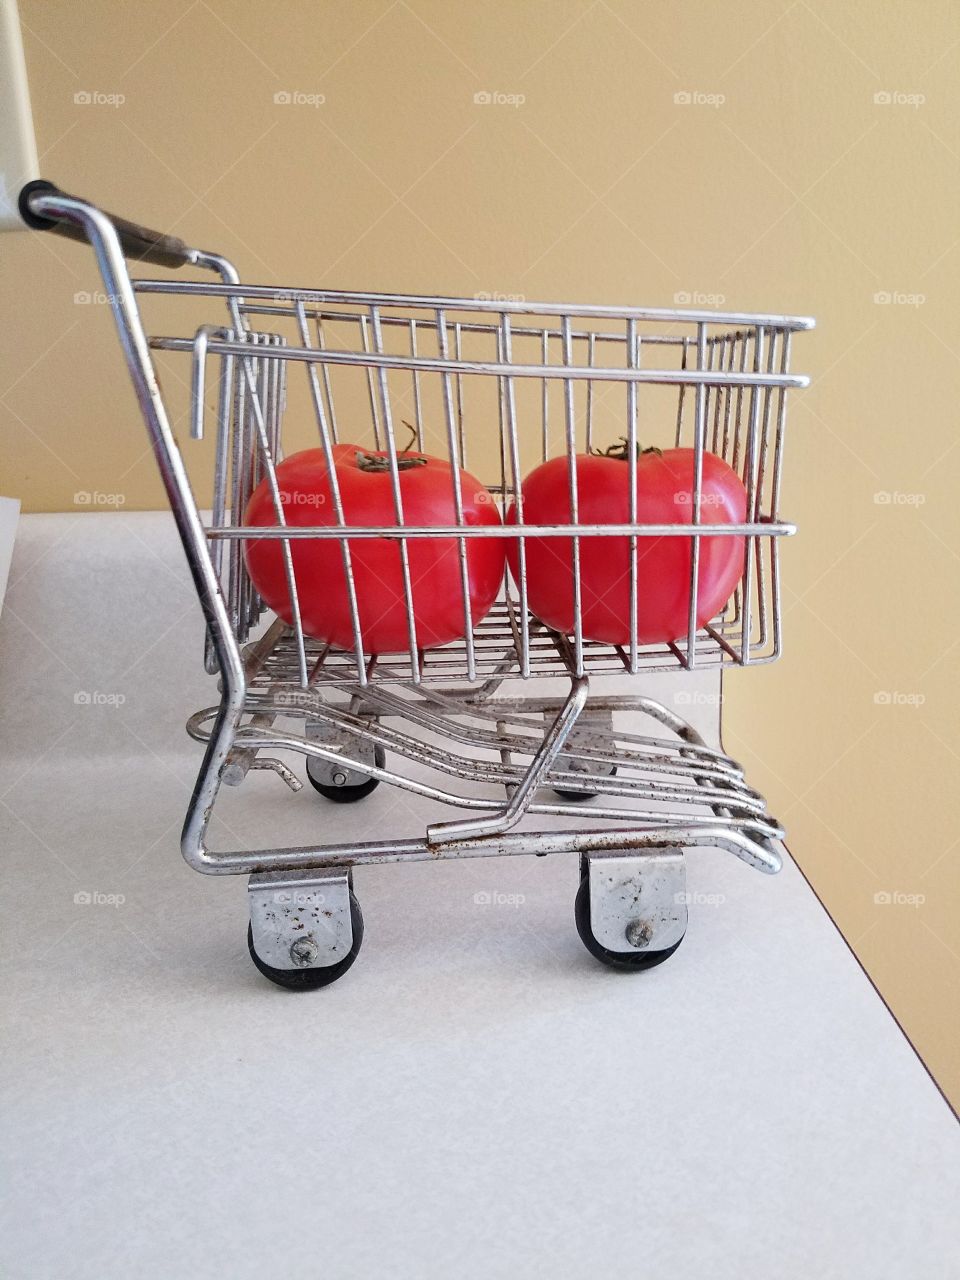 A tiny cart or large tomatoes?